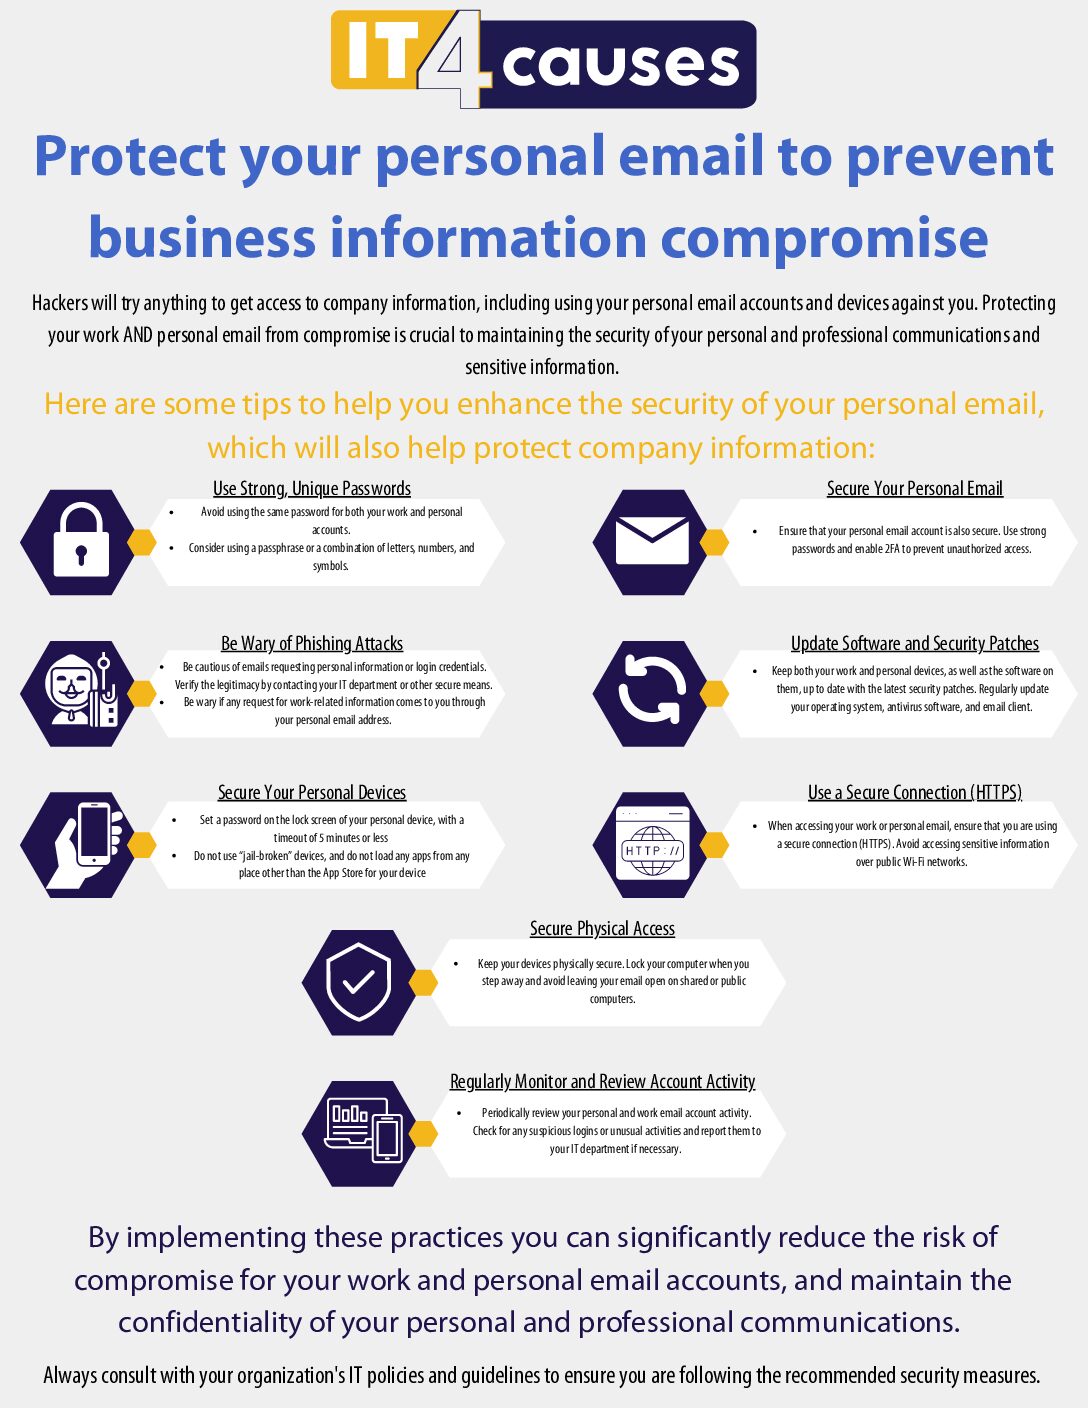 An infographic with tips for protecting your personal email